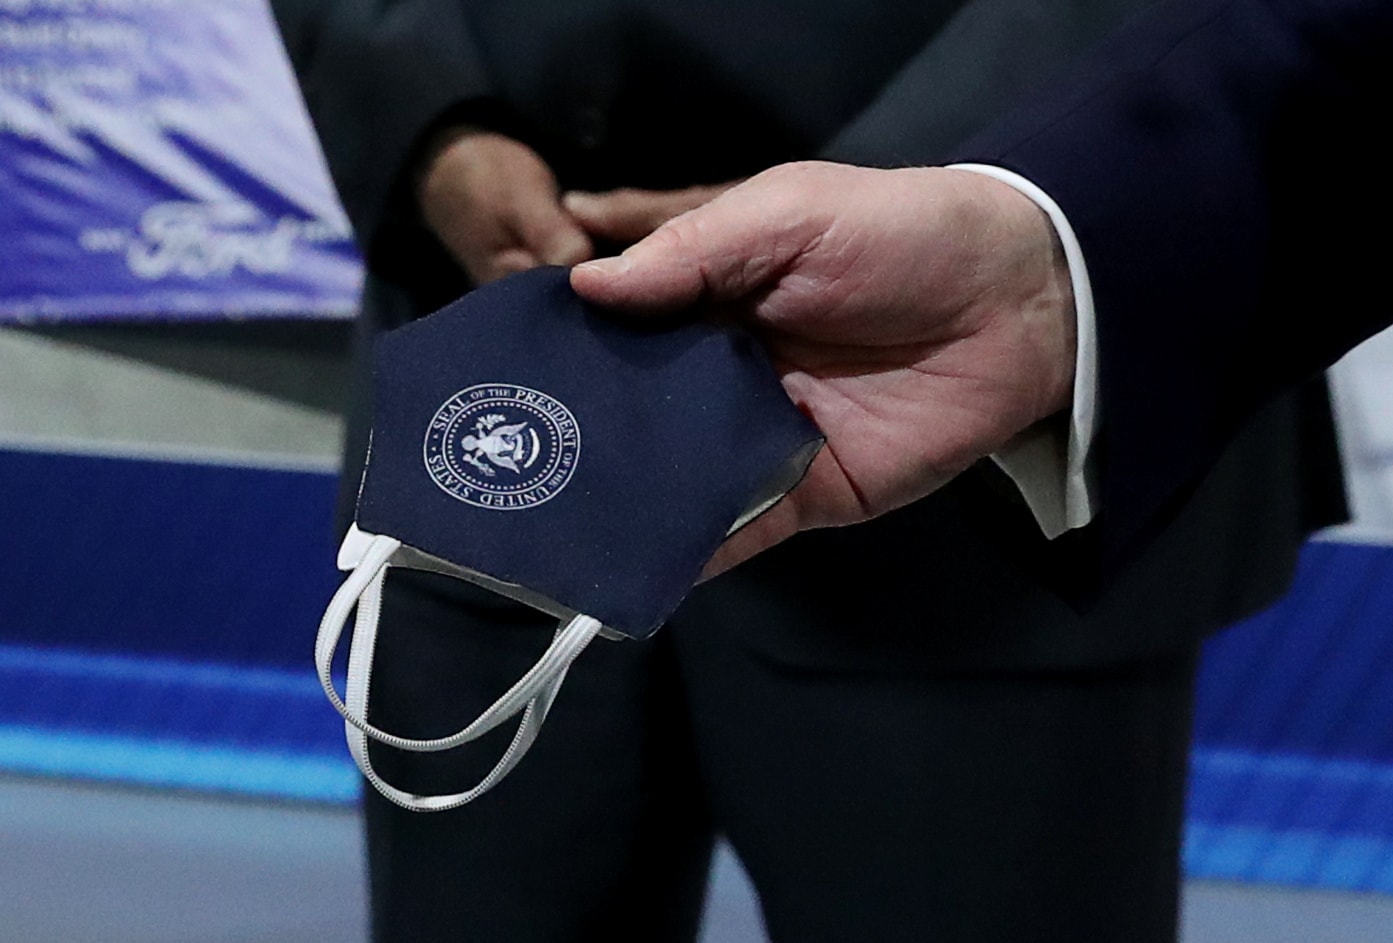 Trump holds a protective face mask with a presidential seal on it that he said he had been wearing earlier in his tour at the Ford Rawsonville Components Plant.